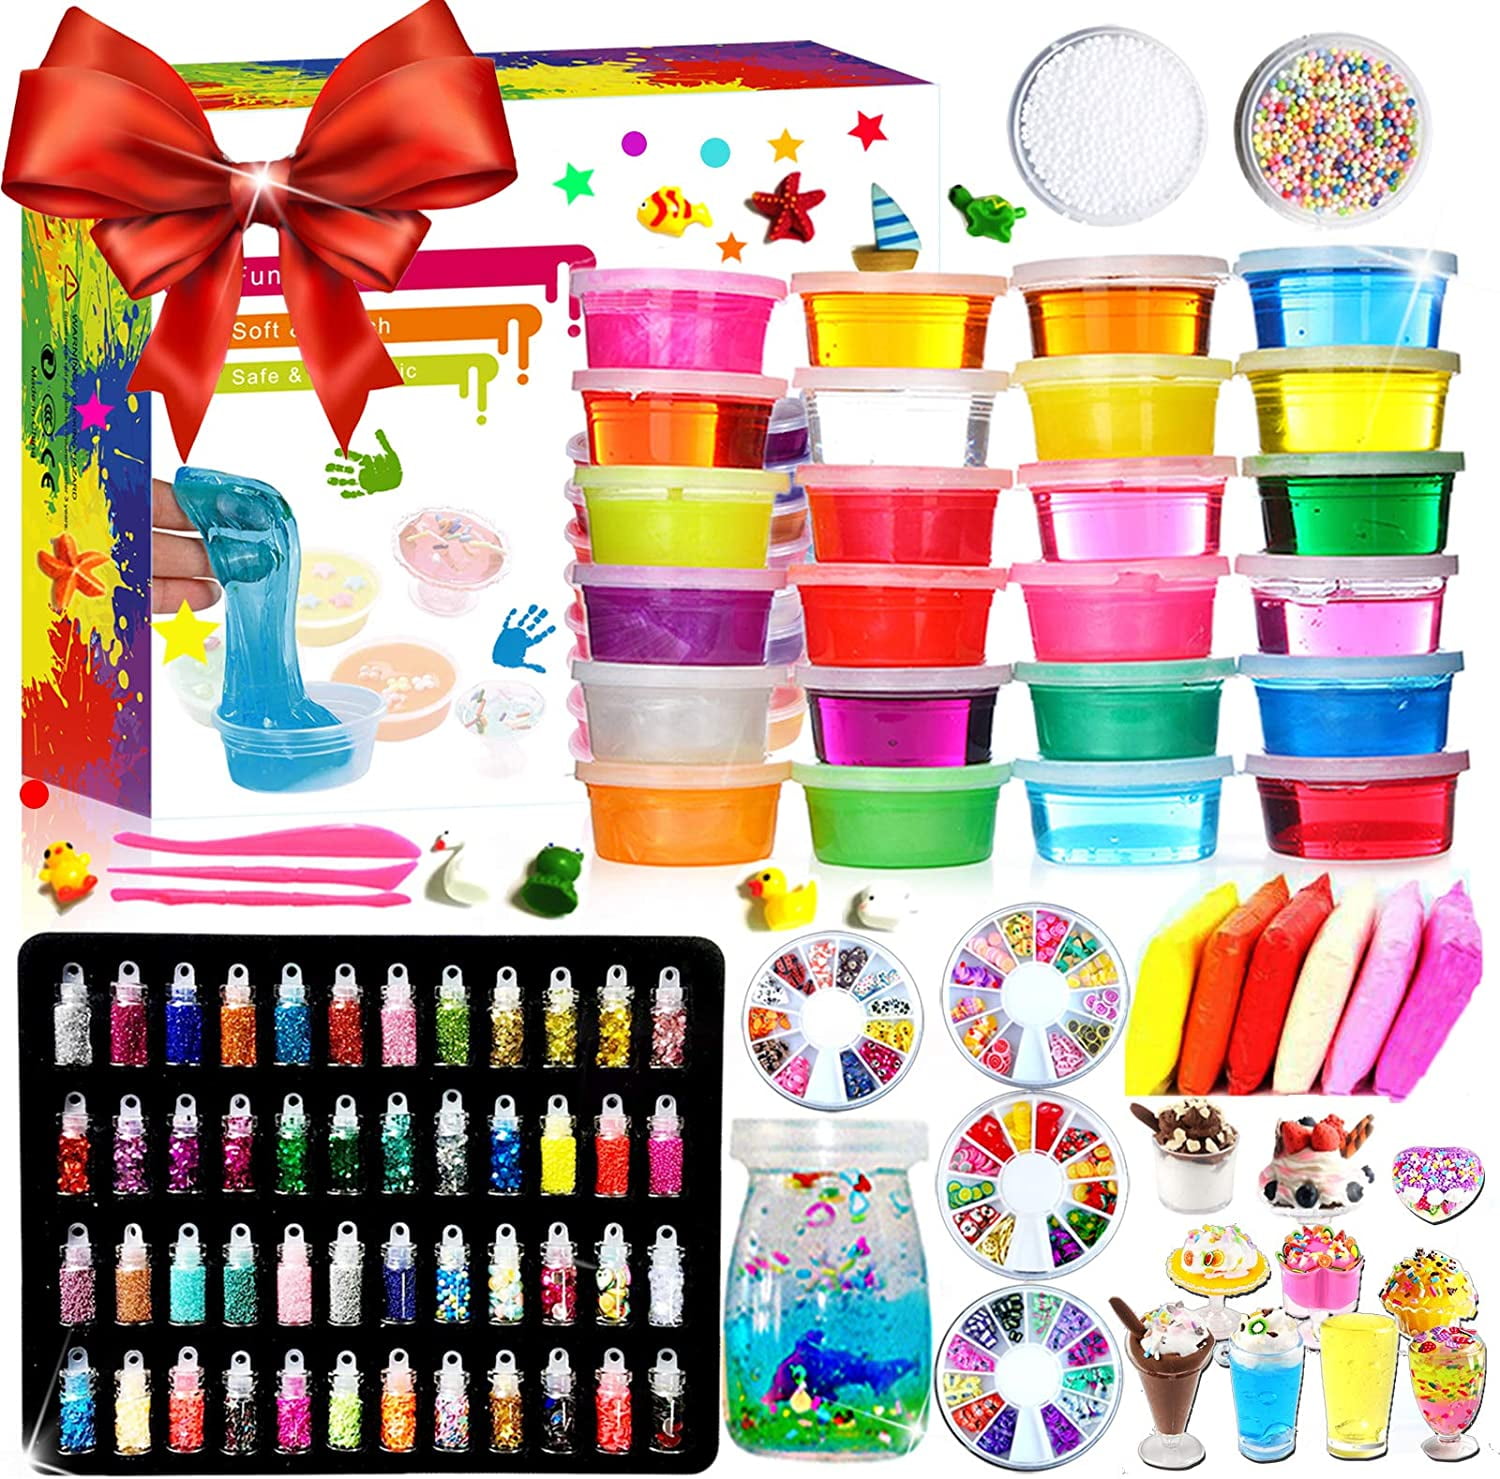 Slime Making Kit with 18 Colors Crystal Clear Slime Glitter Powder and More for Kids Art Craft Toys Ultimate Glow in The Dark Powder DIY Slime Kit Set for Girls Boys